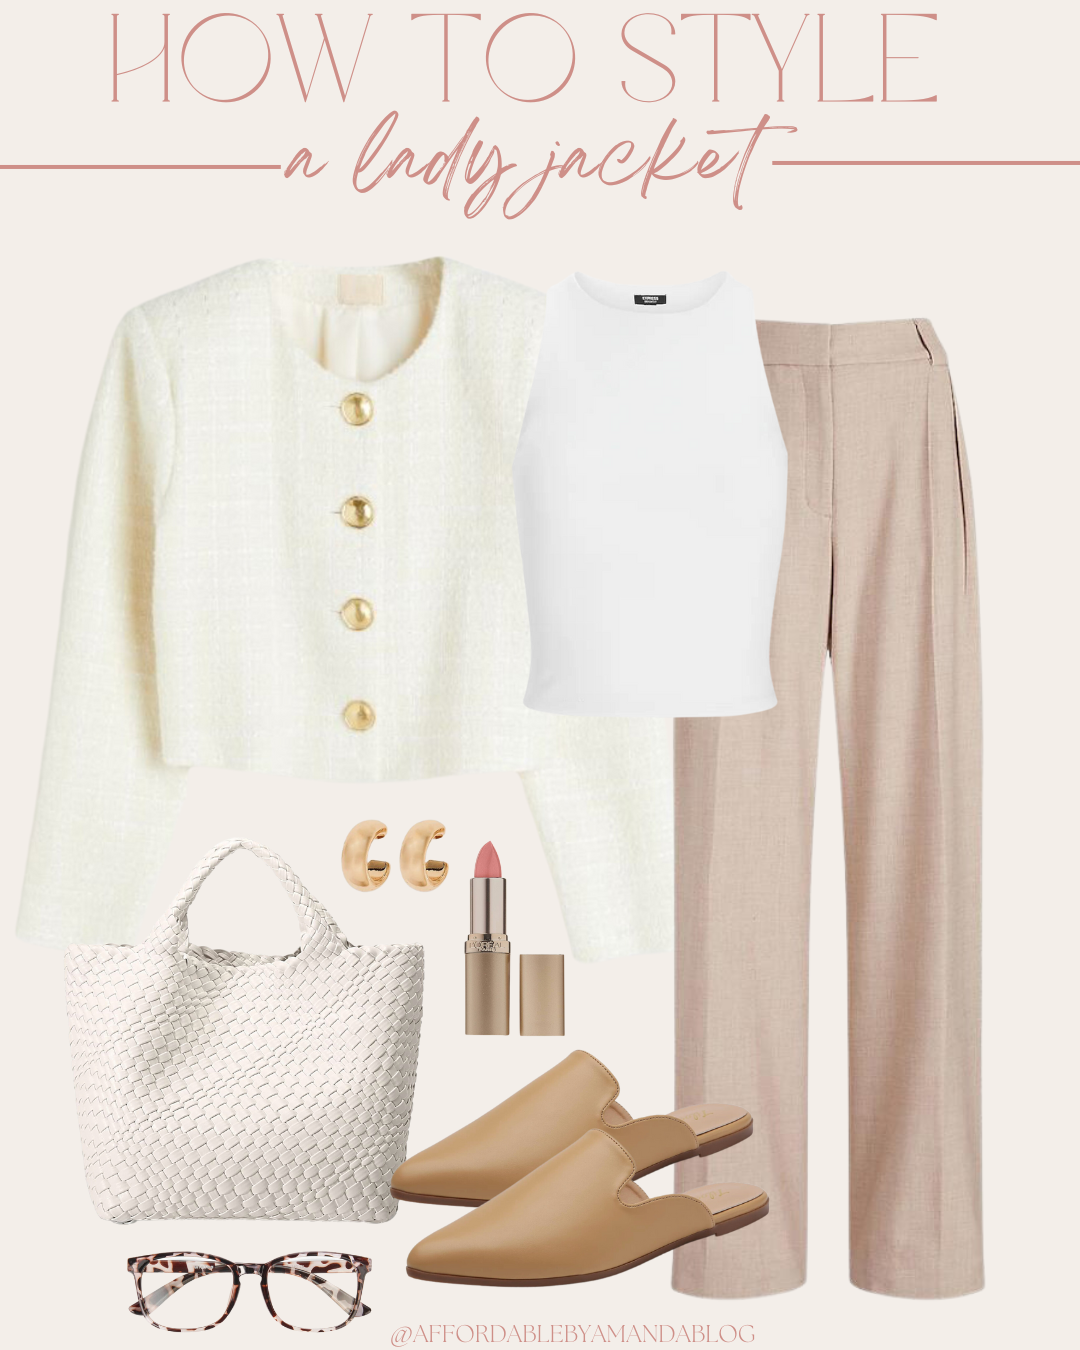 Affordable by Amanda shares how to wear a lady jacket - Tweed Ladies Jacket - Sweater Lady Jacket - J Crew Ladies Jacket - Lady Jacket Style